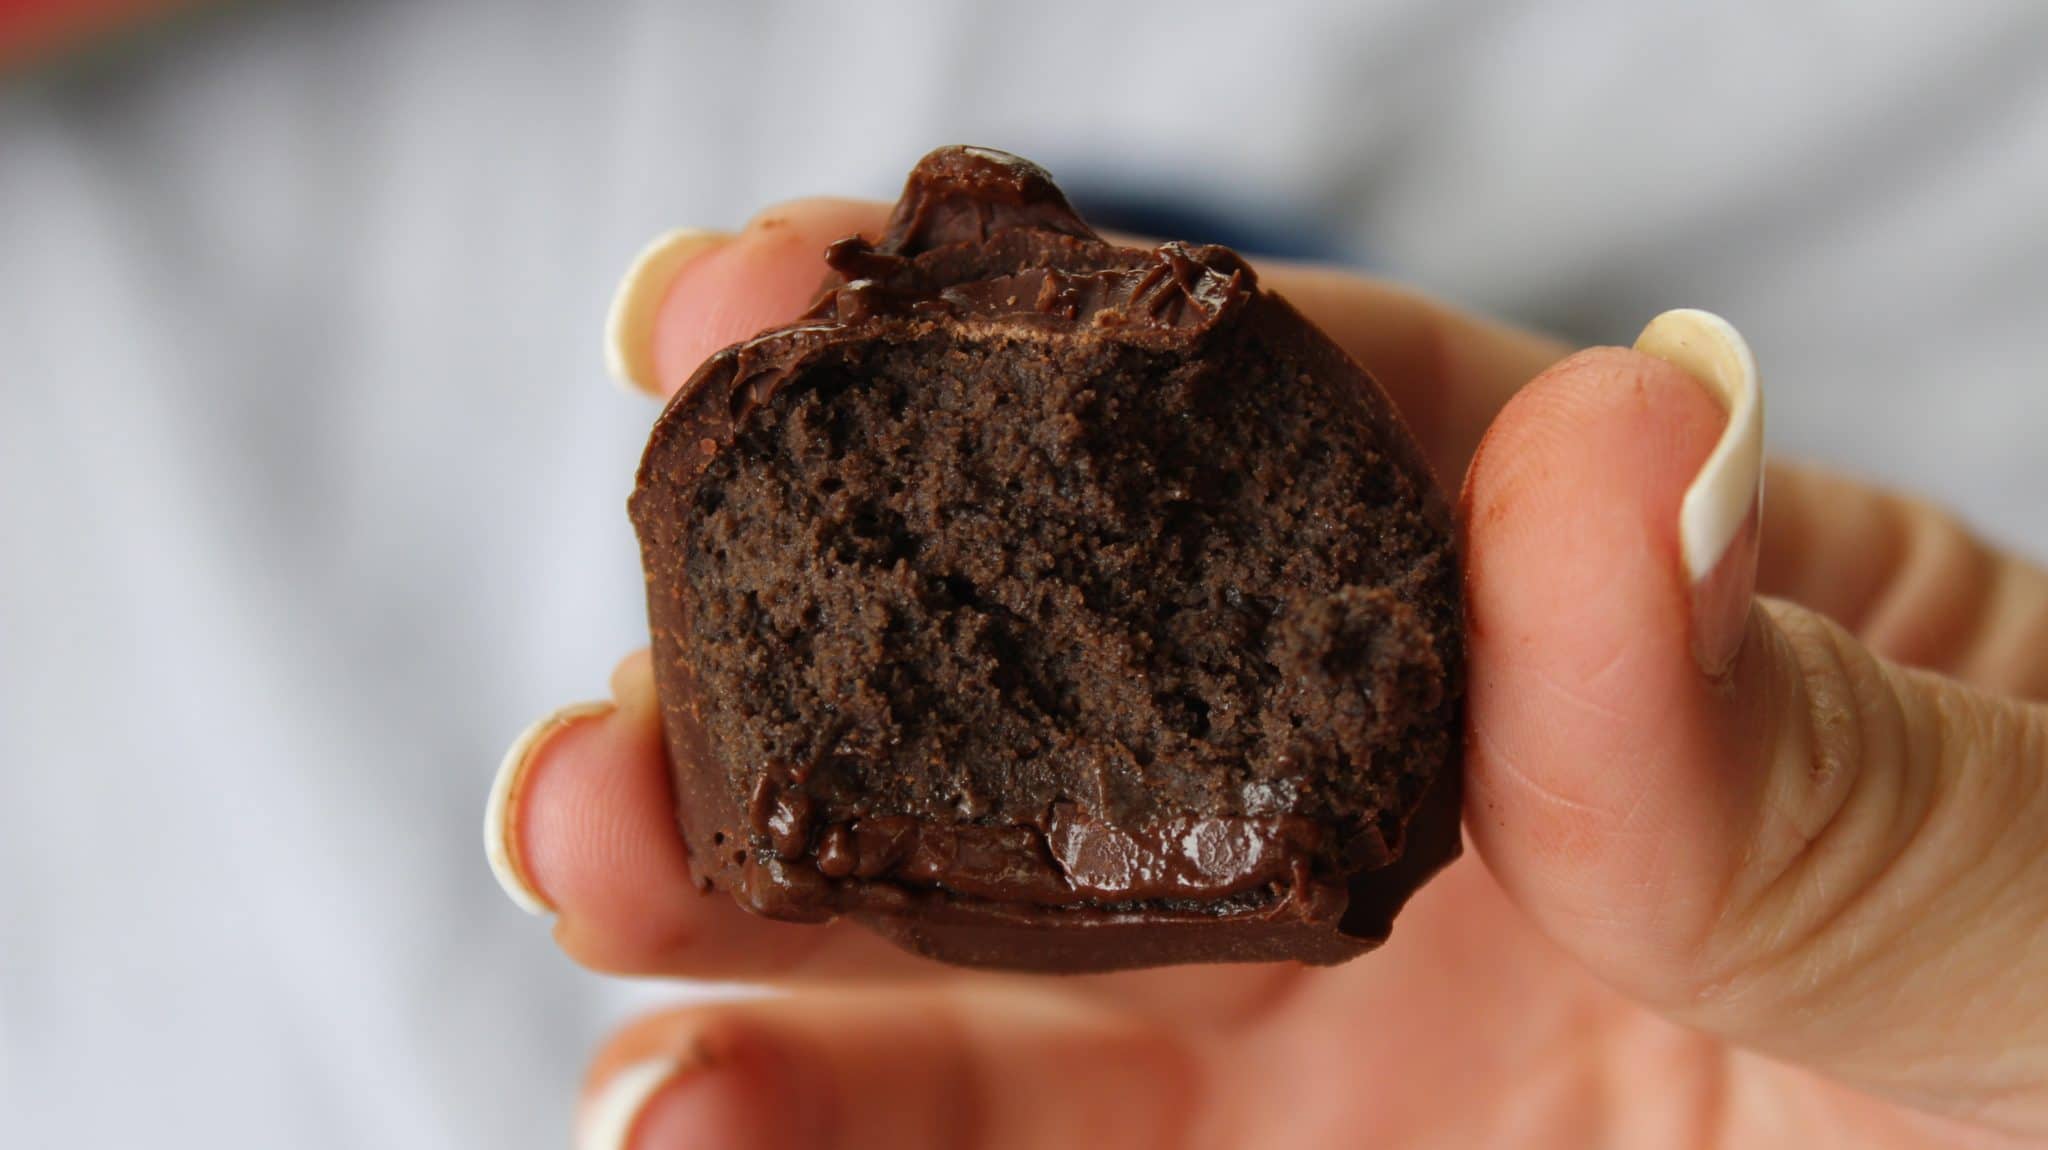 You will think you are enjoying a brownie when you take your first bite of this Oreo Truffle recipe!